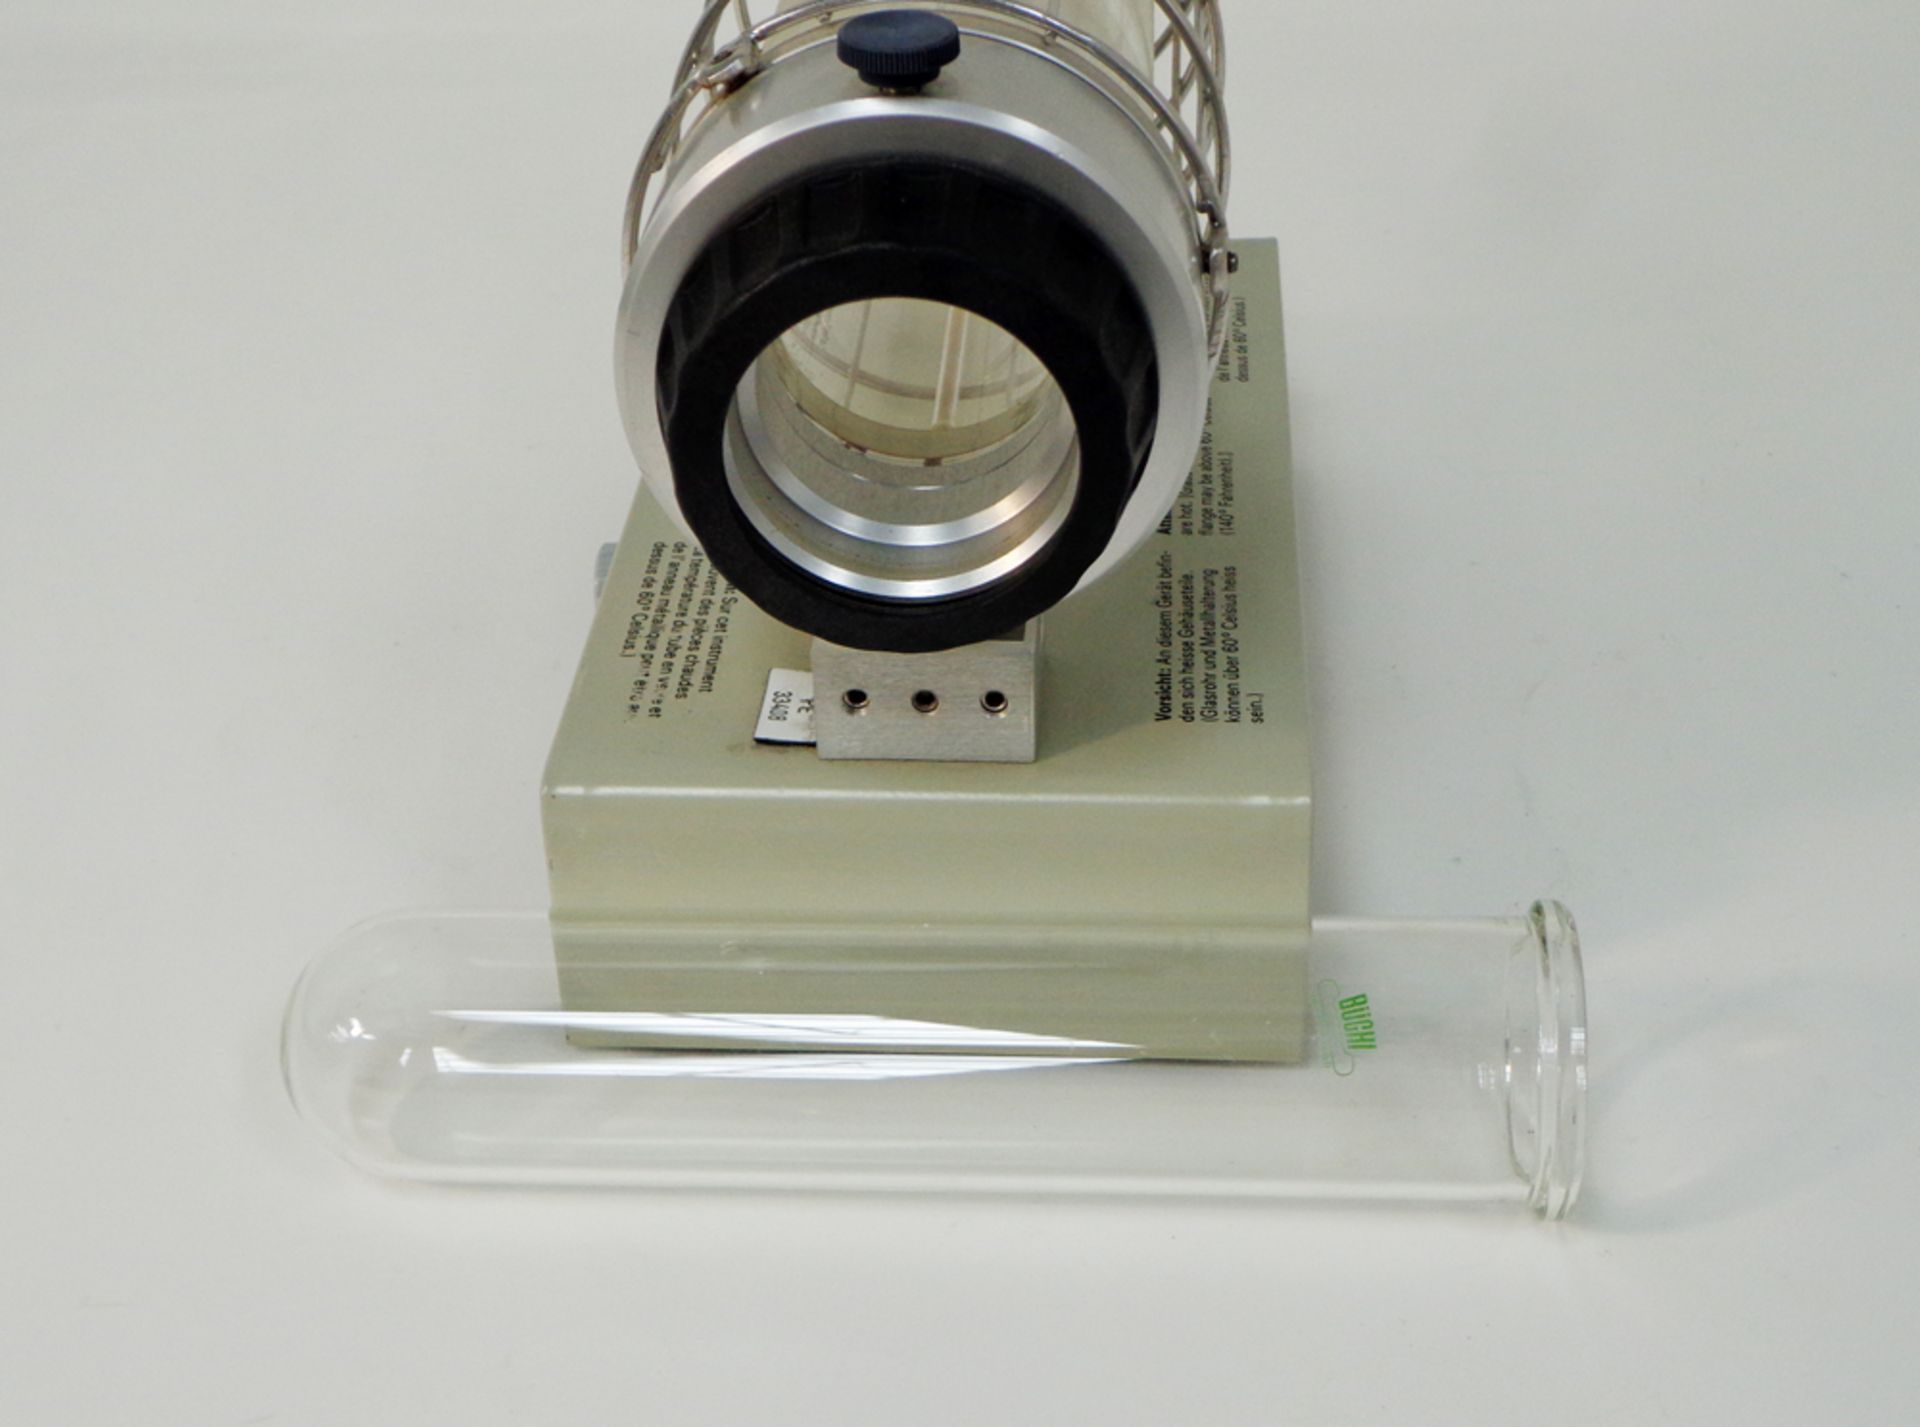 Buchi TO-51 Glass Titrator Oven, serial number 1224709 (Ref: WA11728) - Image 4 of 6